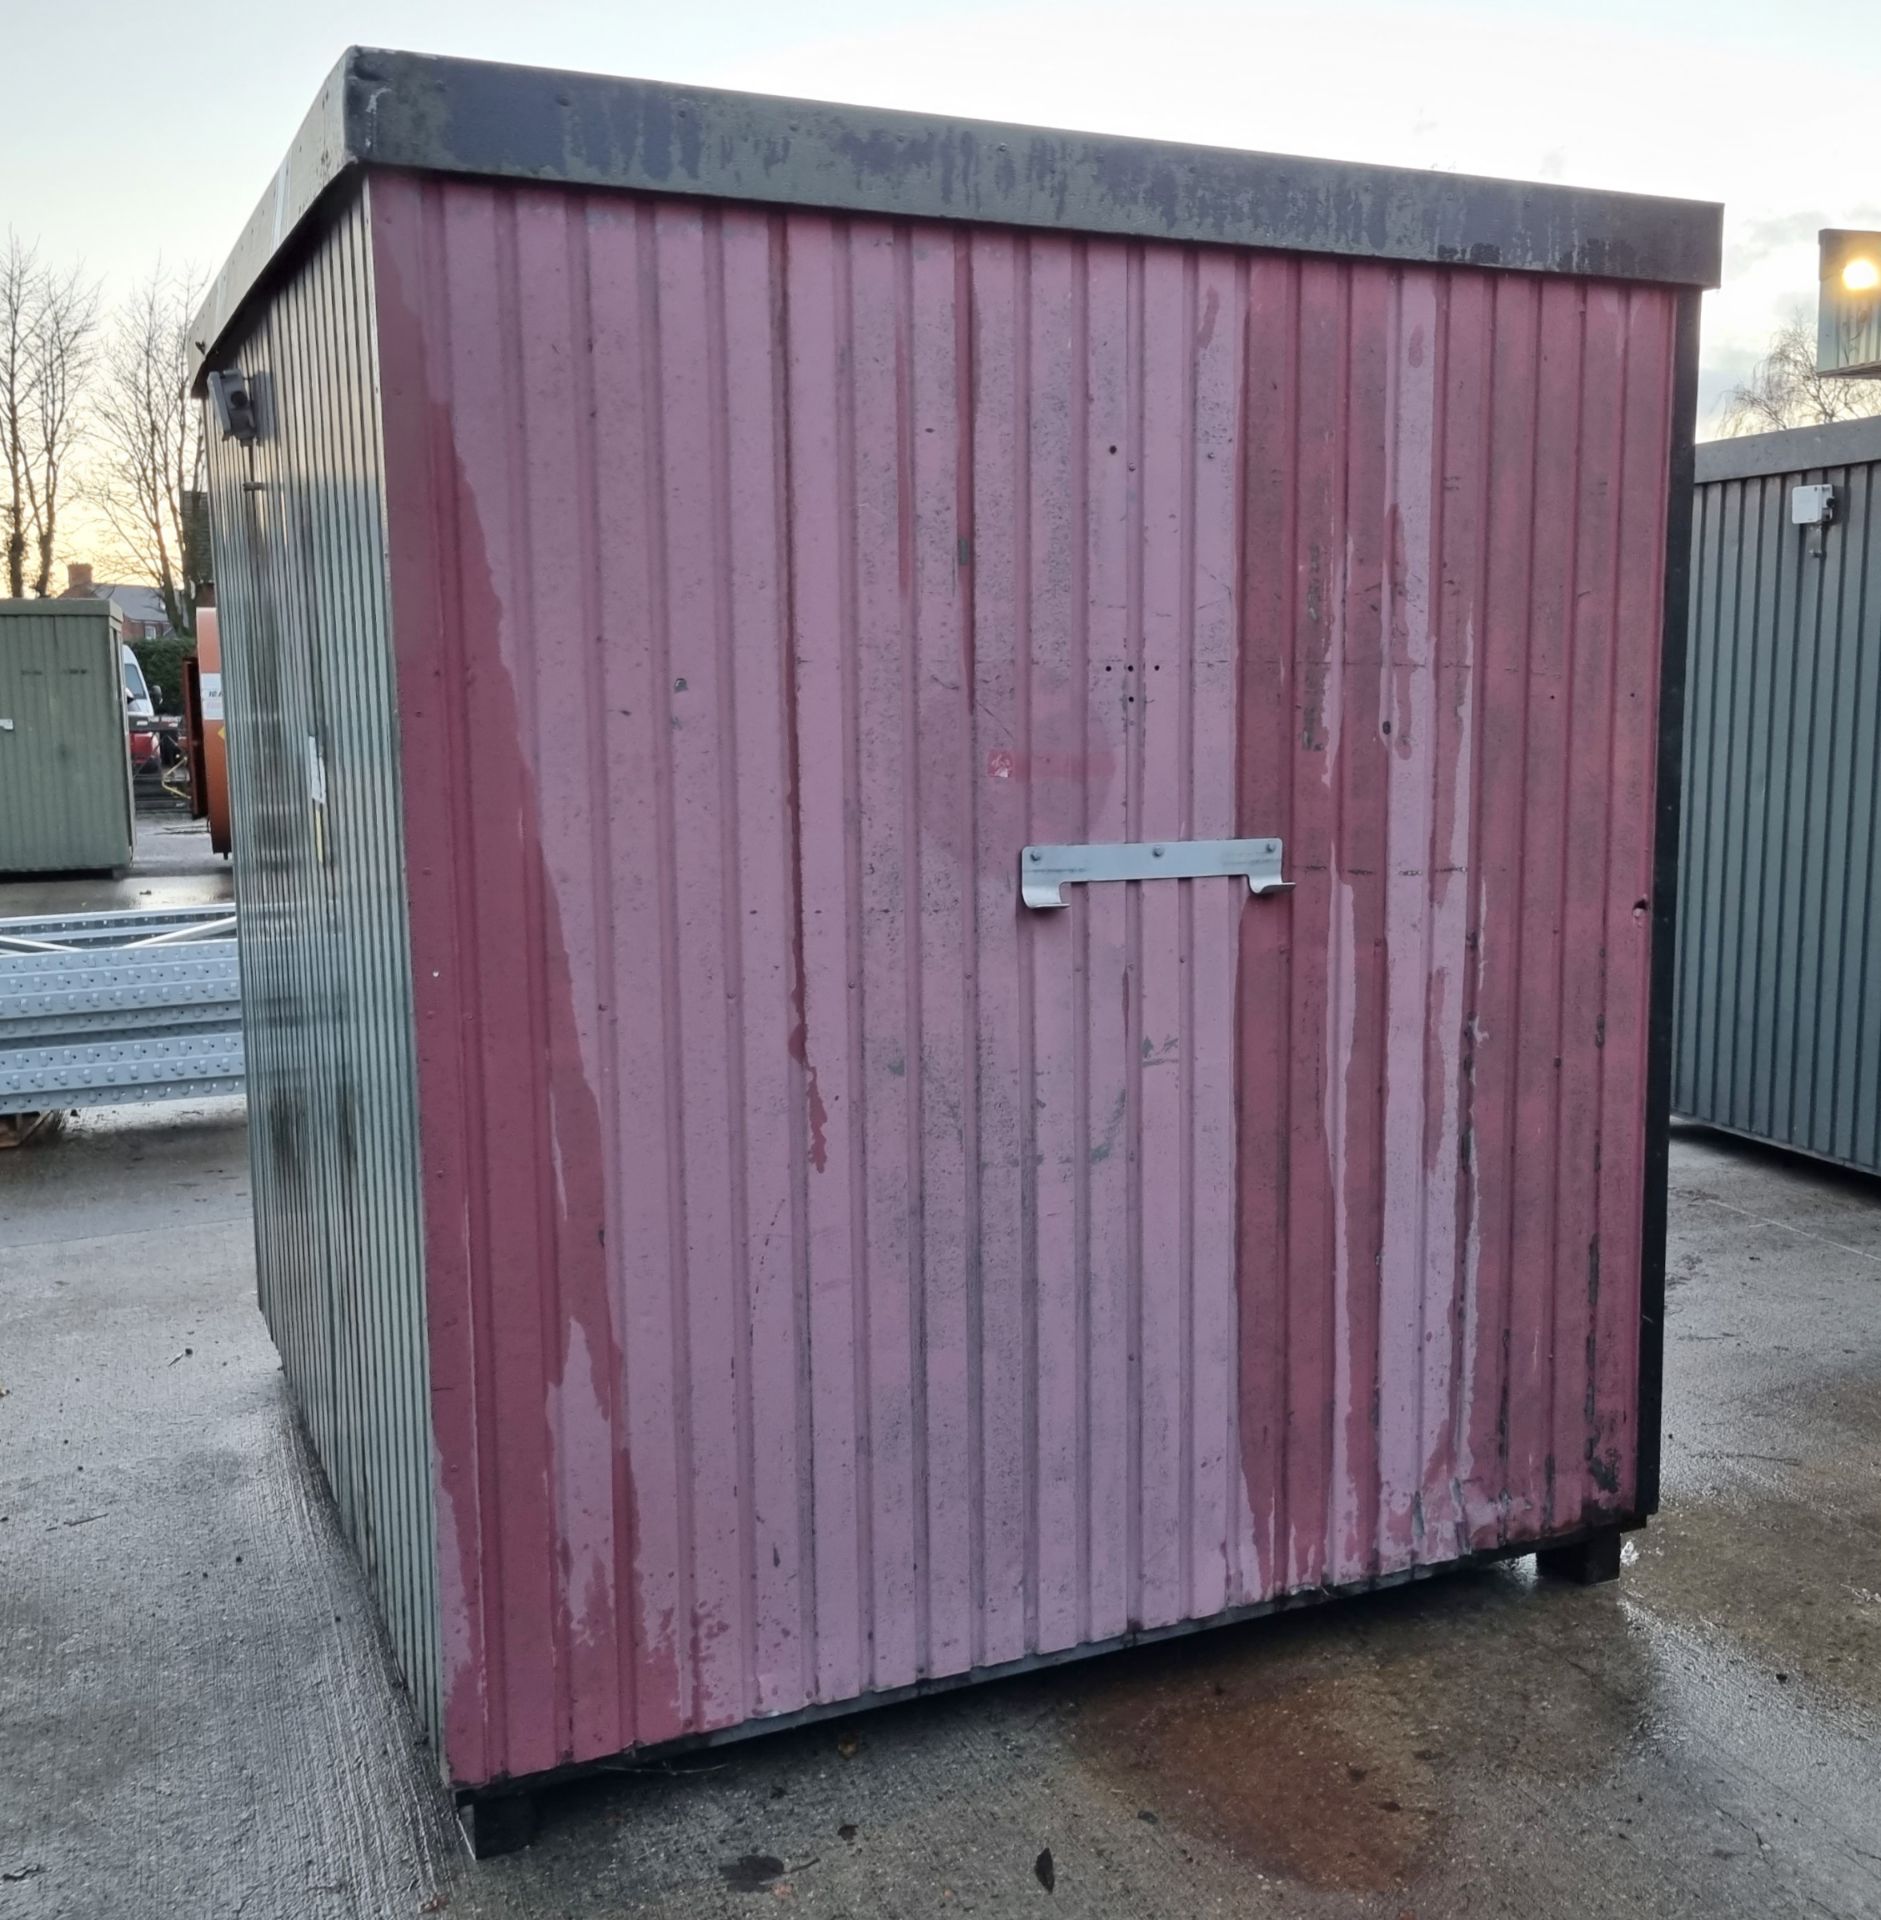 Flohr & Sohne Type ERZ/US Portable cabin with electrical hook up 500-600V L243 x W213 x H237cm - Image 4 of 10